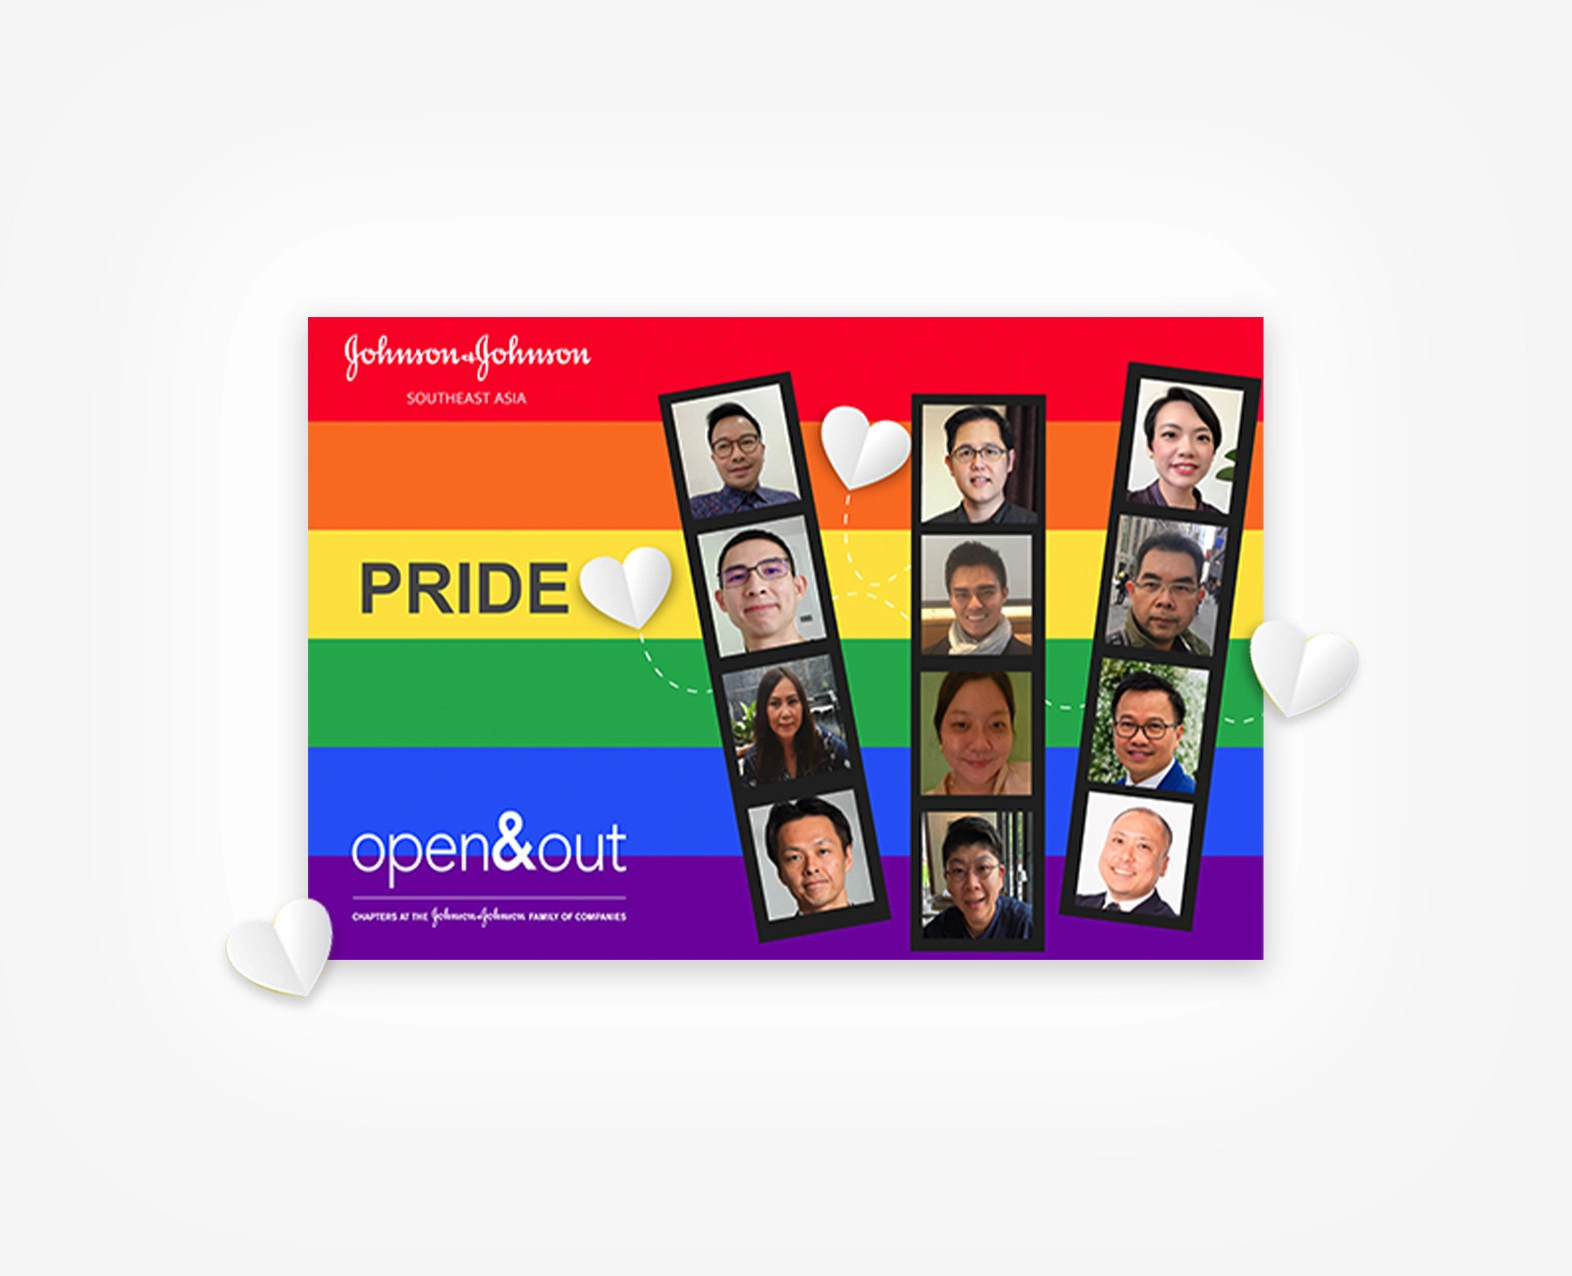 Three photo stripes with four portraits each placed on a colerful pride flag and the texts 'Pride' as well as the logo 'open&out'. (photo)